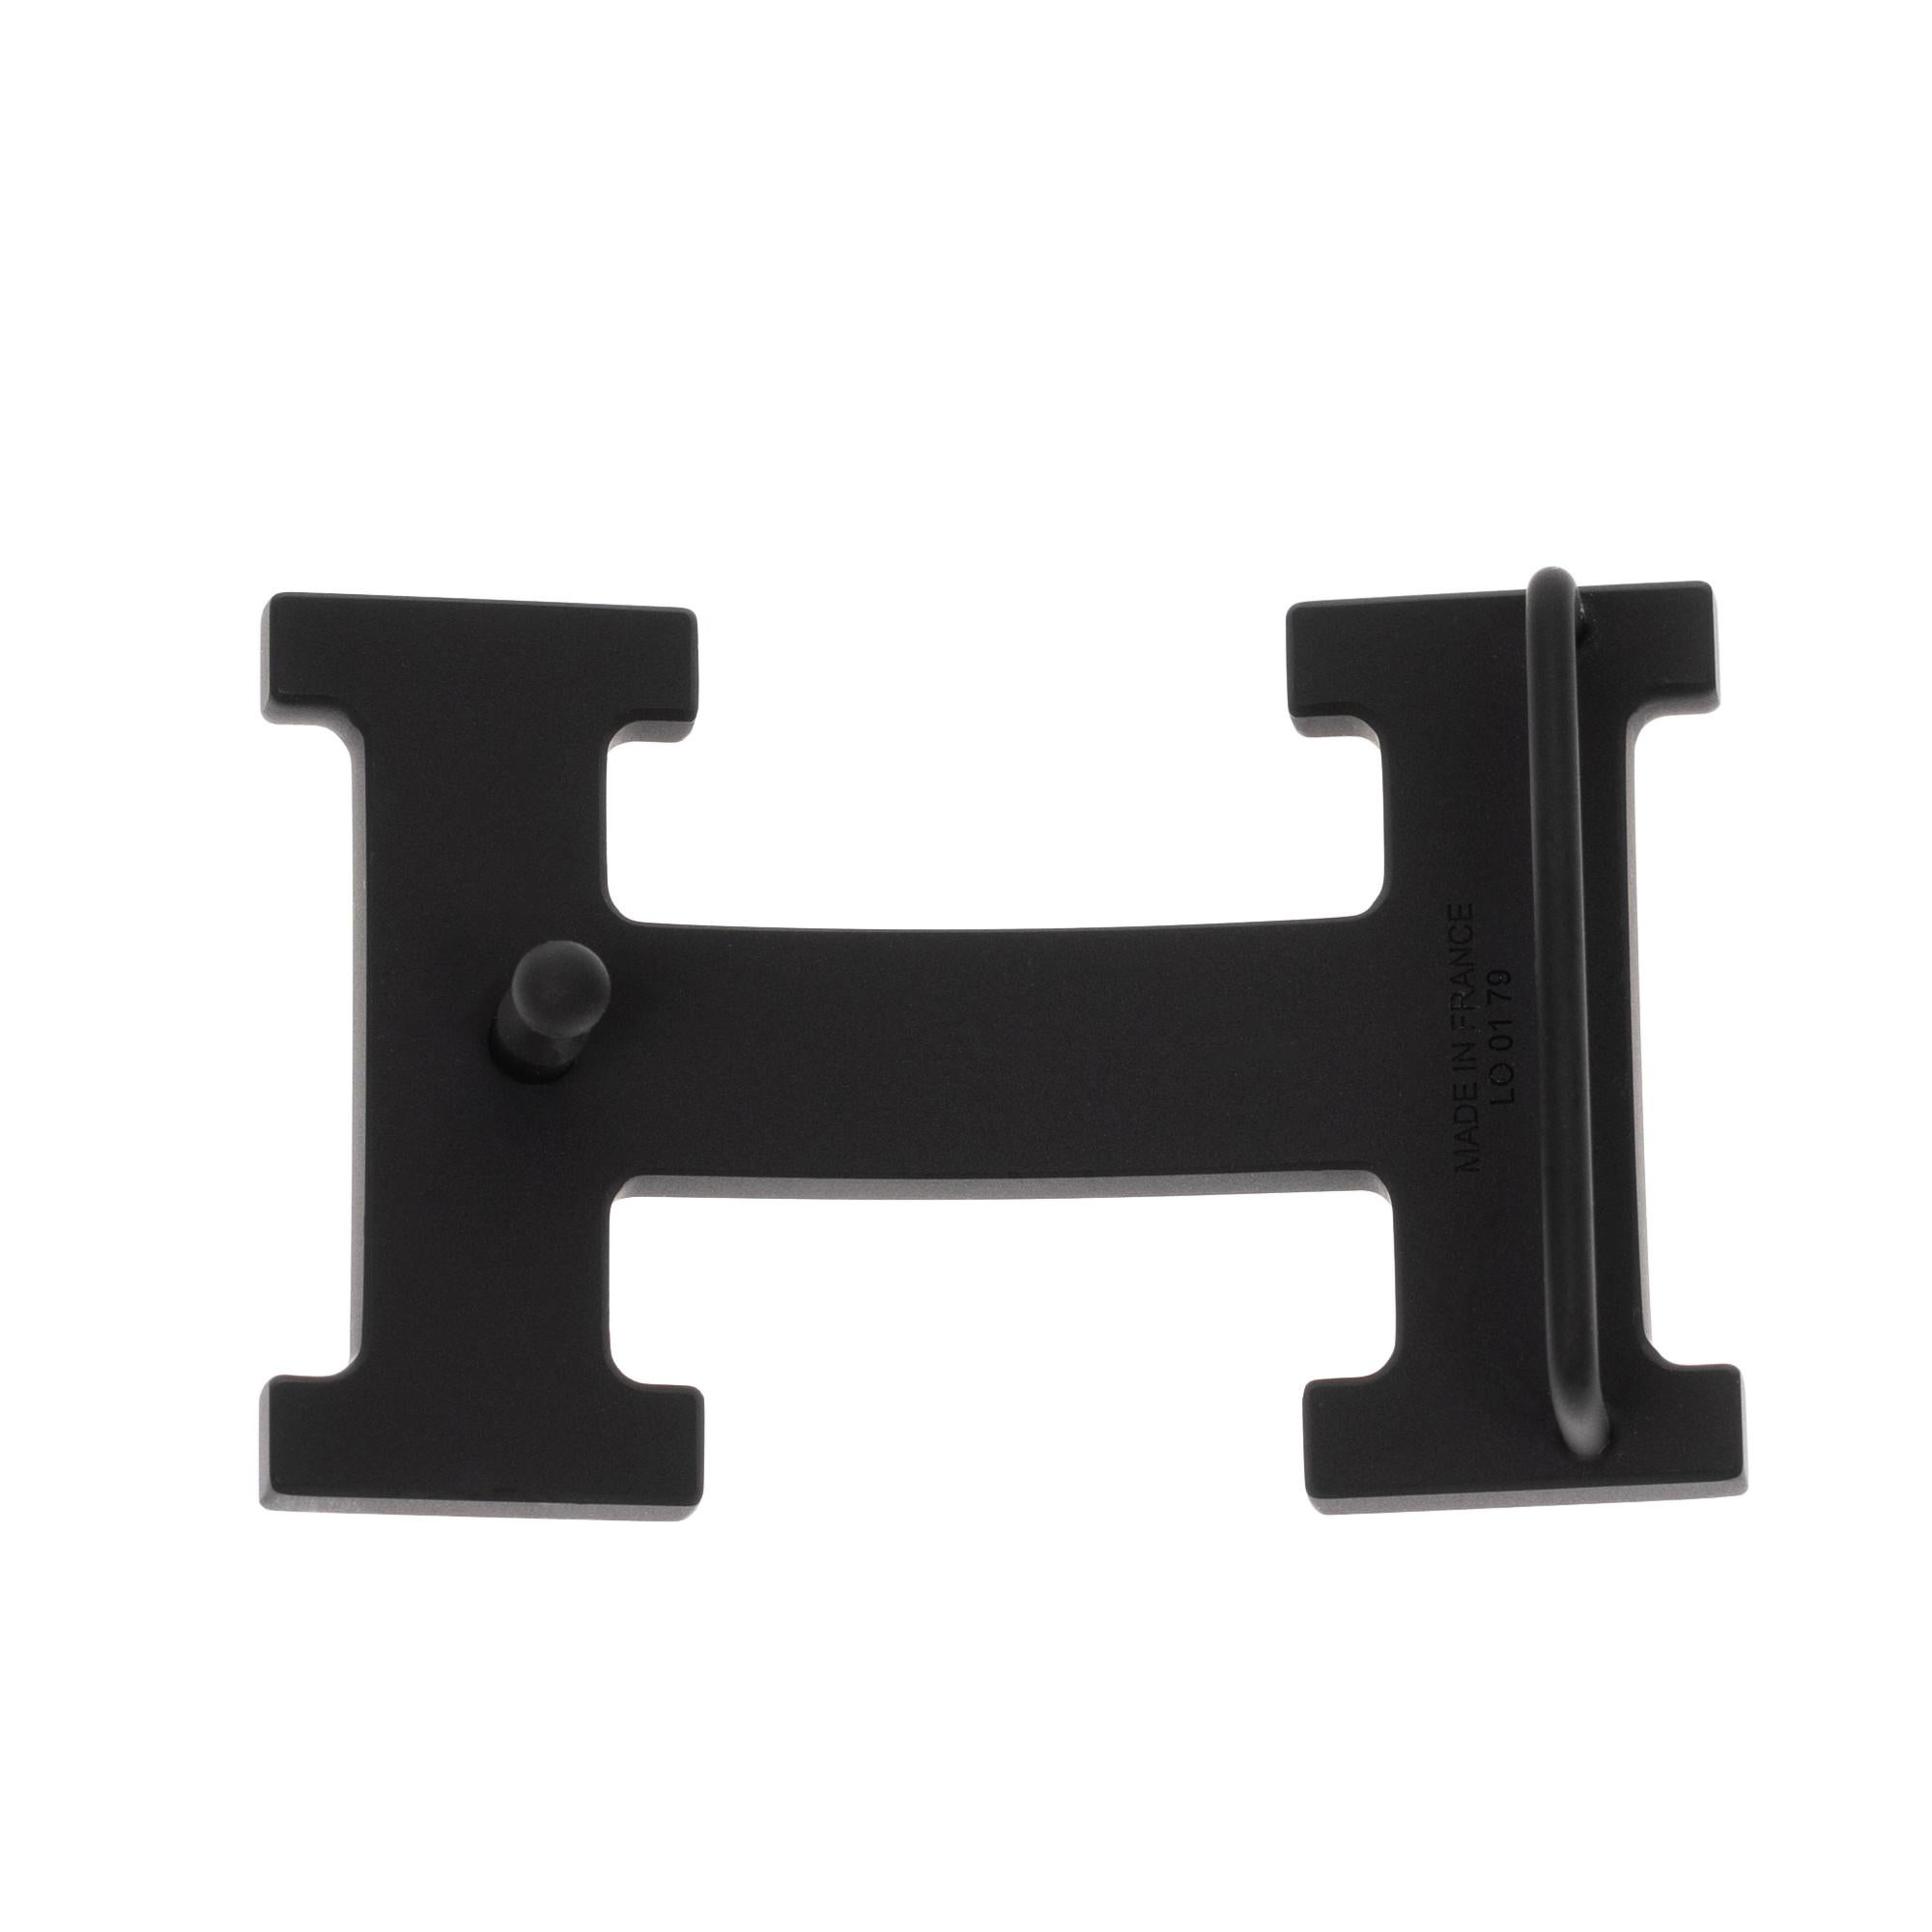 Beautiful H-shaped Hermes belt buckle, model 5382 in matt black PVD plated metal.
Signature: Hermès.
Suitable for a 3.2 cm wide belt.
Dimensions: H: 3.8 x W: 6 x D: 1.4 cm (1,49 x 2,36 x 0,55 In.) 
Note that the buckle is sold alone, without